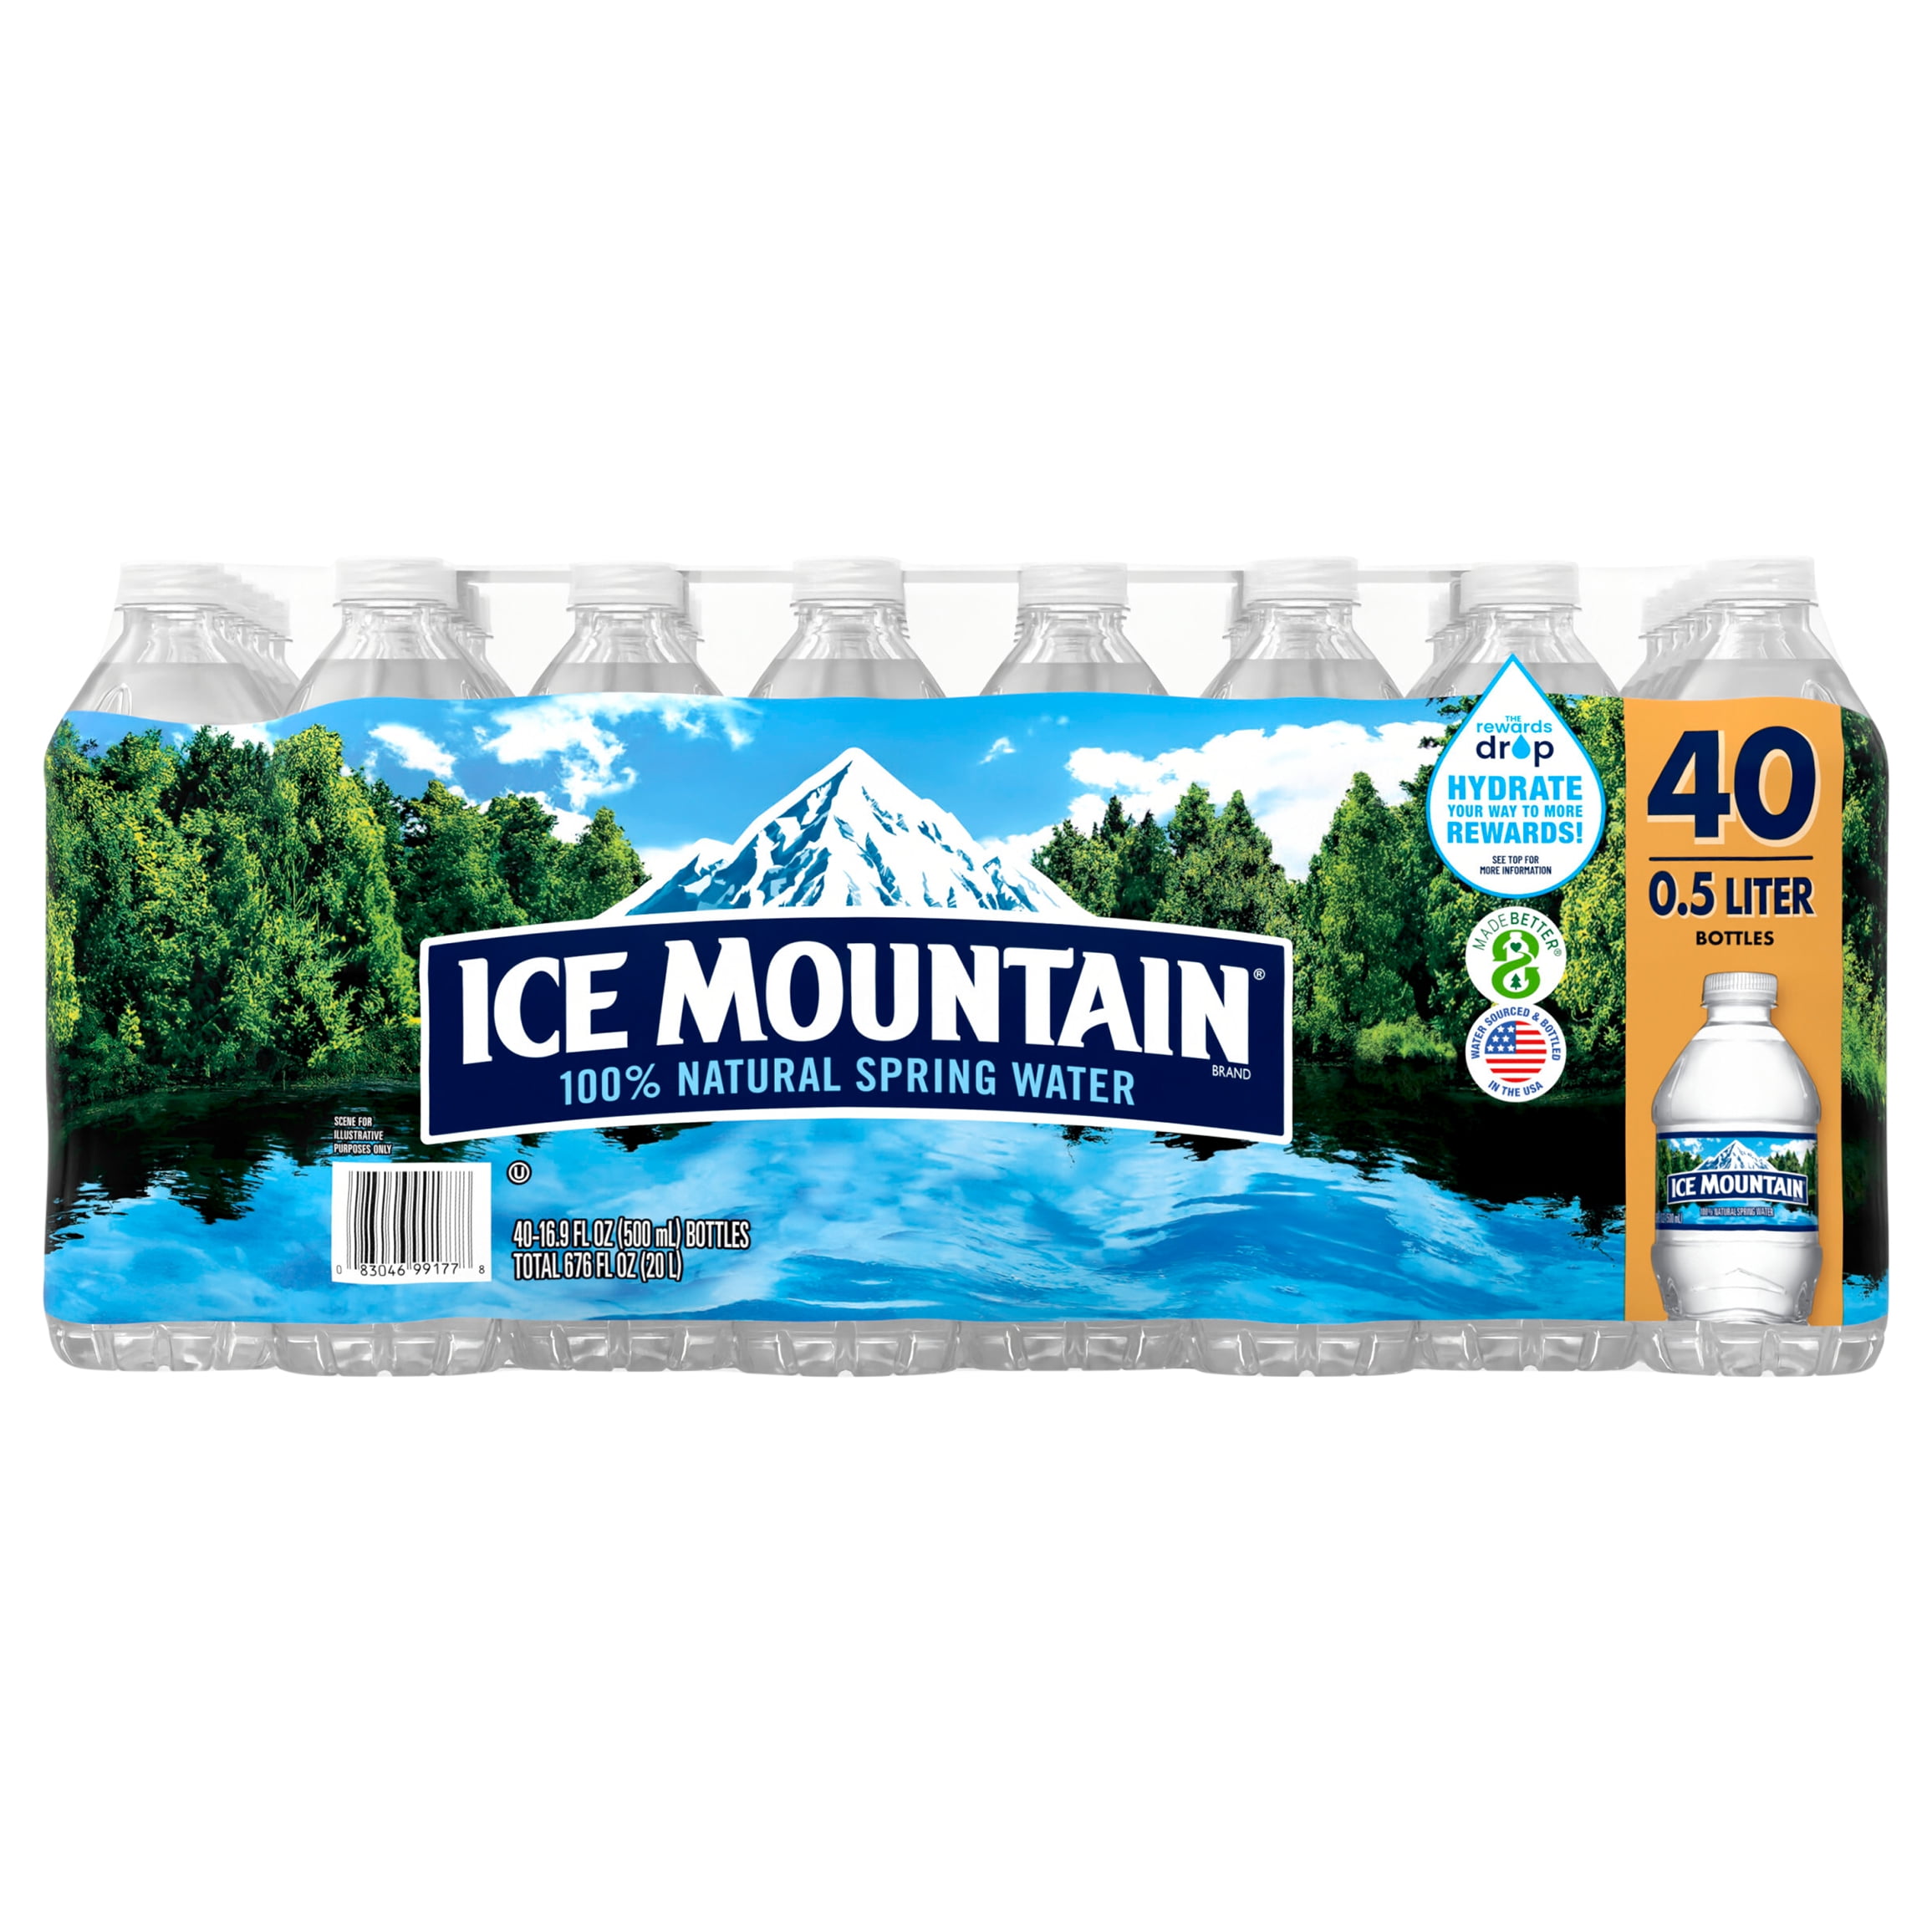 Res Care  Icy Mountain Water